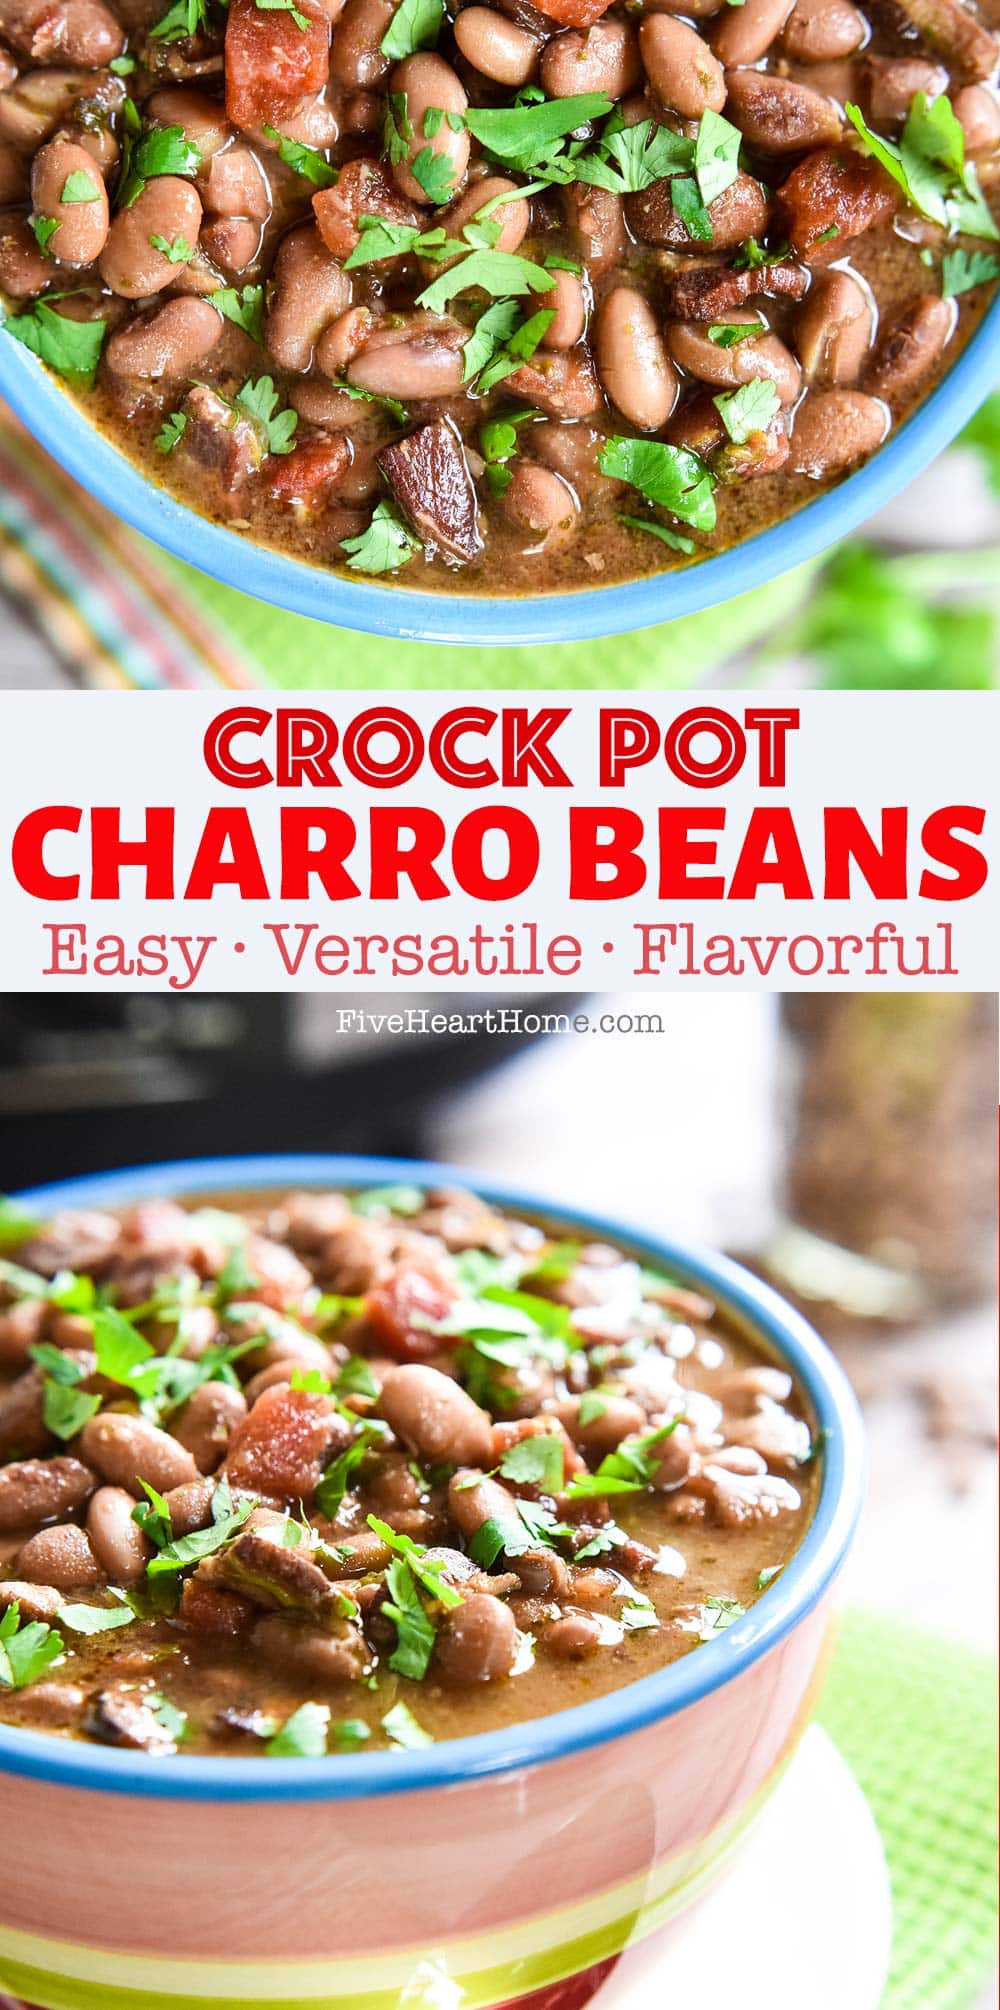 Slow Cooker Charro Beans ~ flavored with bacon, garlic, tomatoes, green chiles, jalapeños, cilantro, and spices and cooked in the crock pot to make them hands-off and truly effortless...the perfect side dish for Mexican food! | FiveHeartHome.com via @fivehearthome